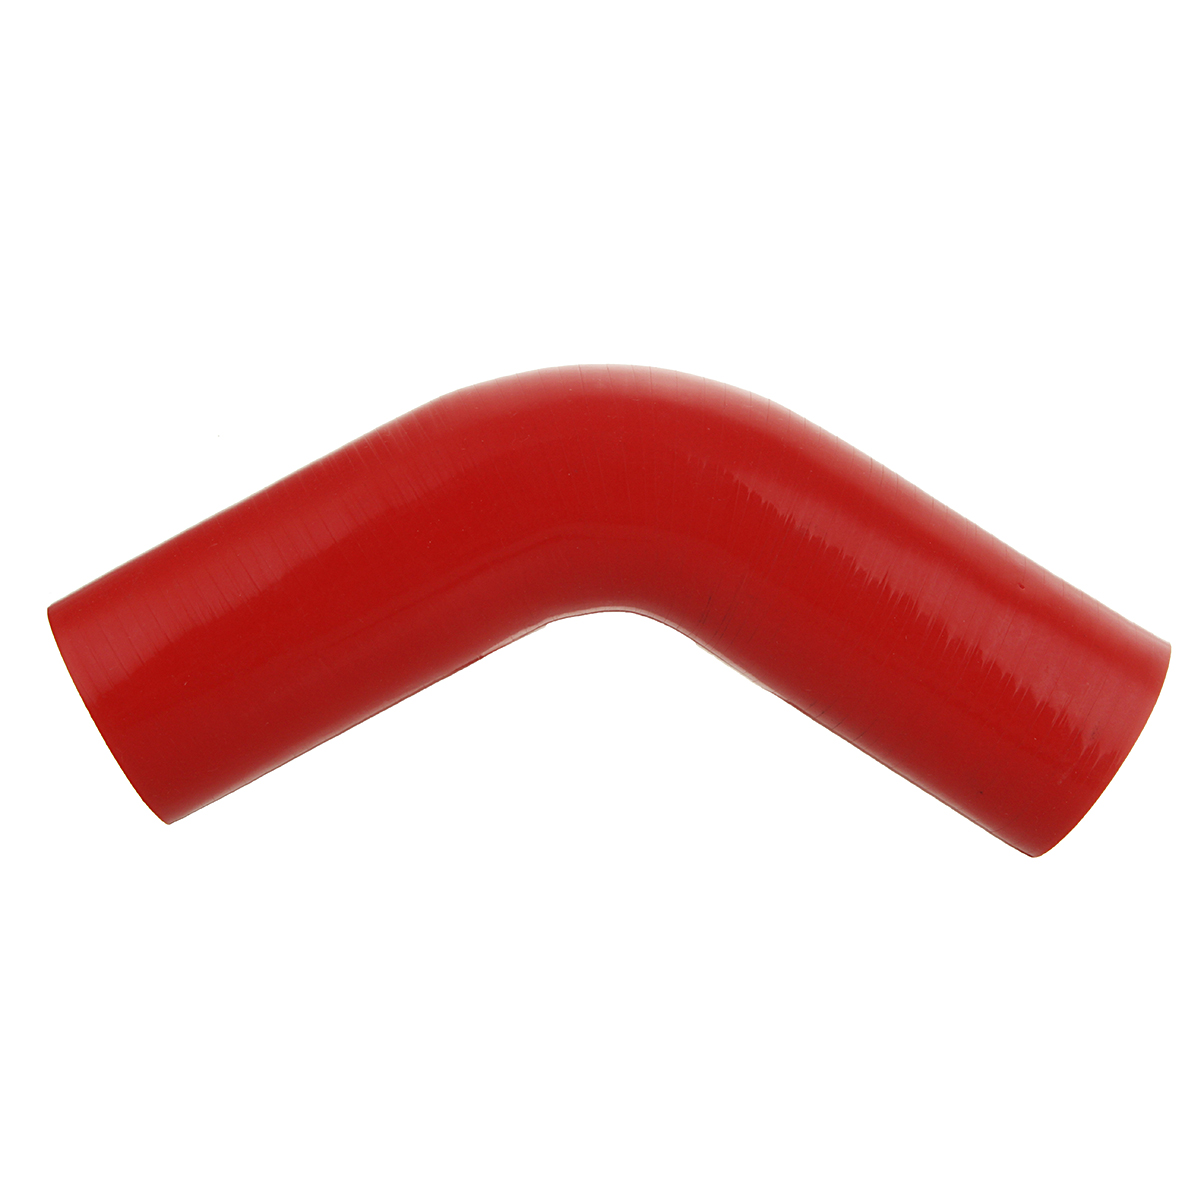 60-Degree-Elbow-Bend-Hose-Auto-Silicone-Hose-Rubber-Air-Water-Coolant-Joiner-Pipe-Tube-1436096-3